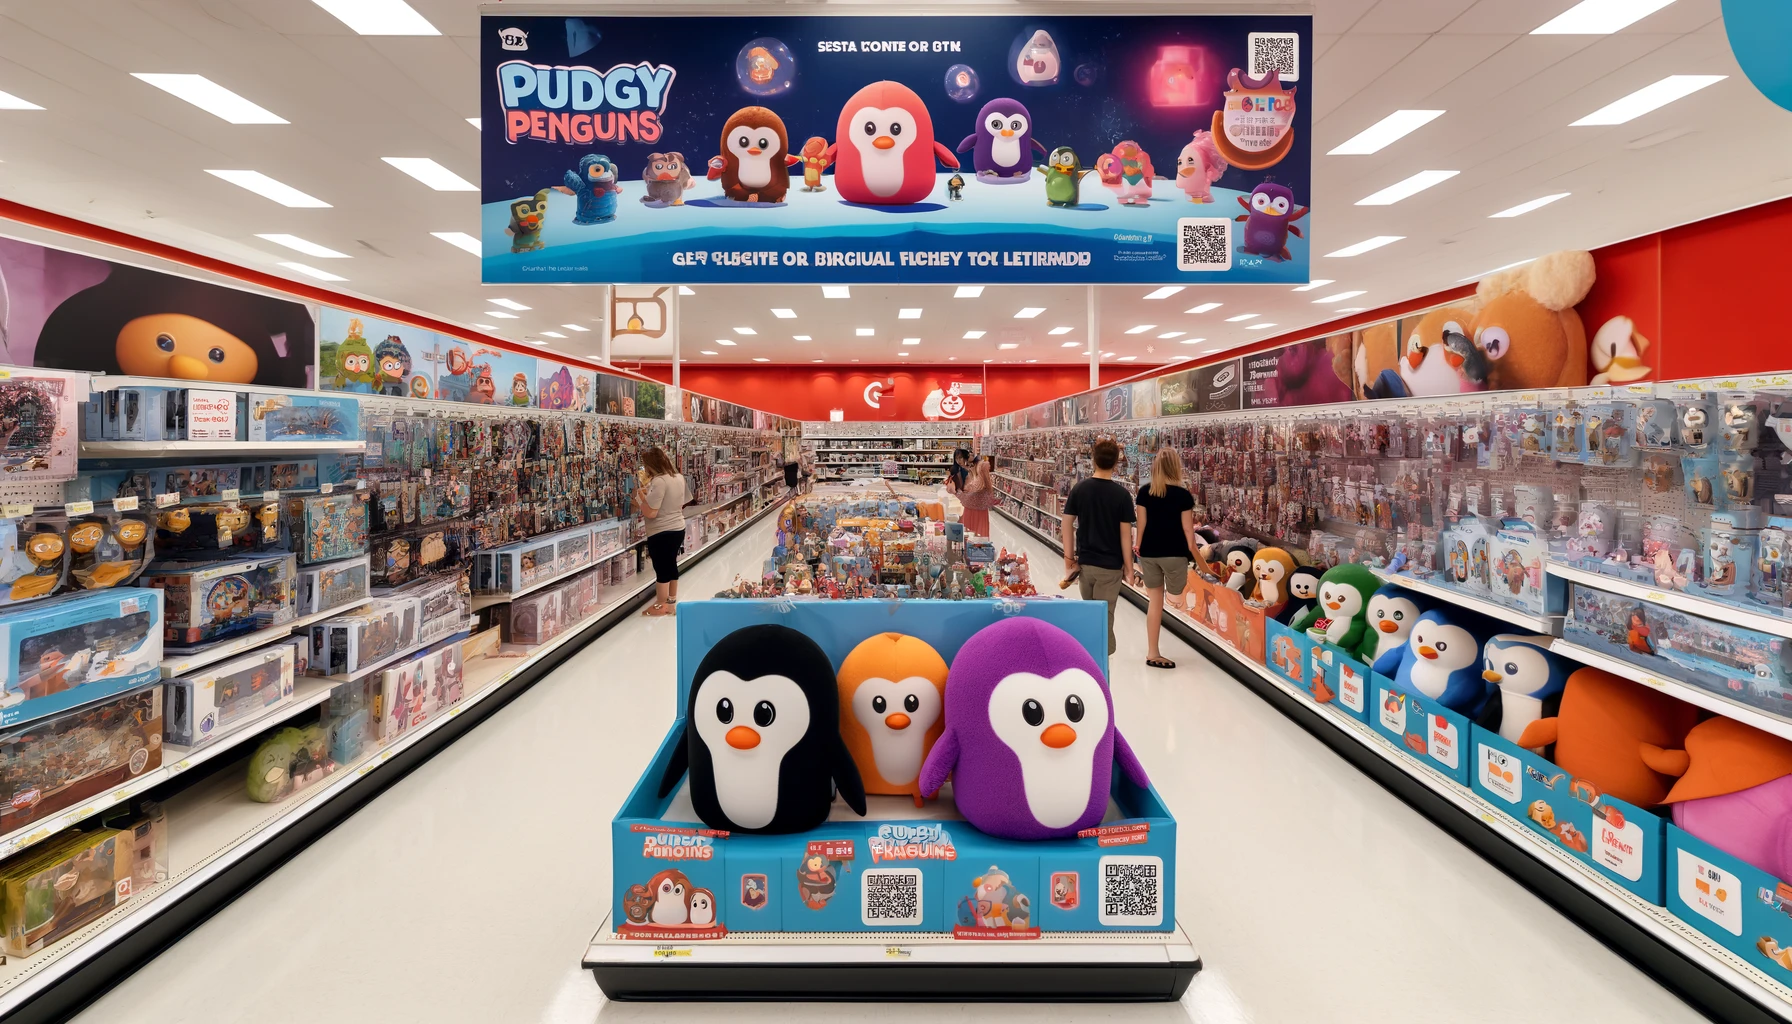 DALL·E 2024-05-15 11.02.23 - A vibrant, modern toy aisle in a Target store filled with shelves stocked with plushies and figurines from the Pudgy Penguins toy line. The scene depi